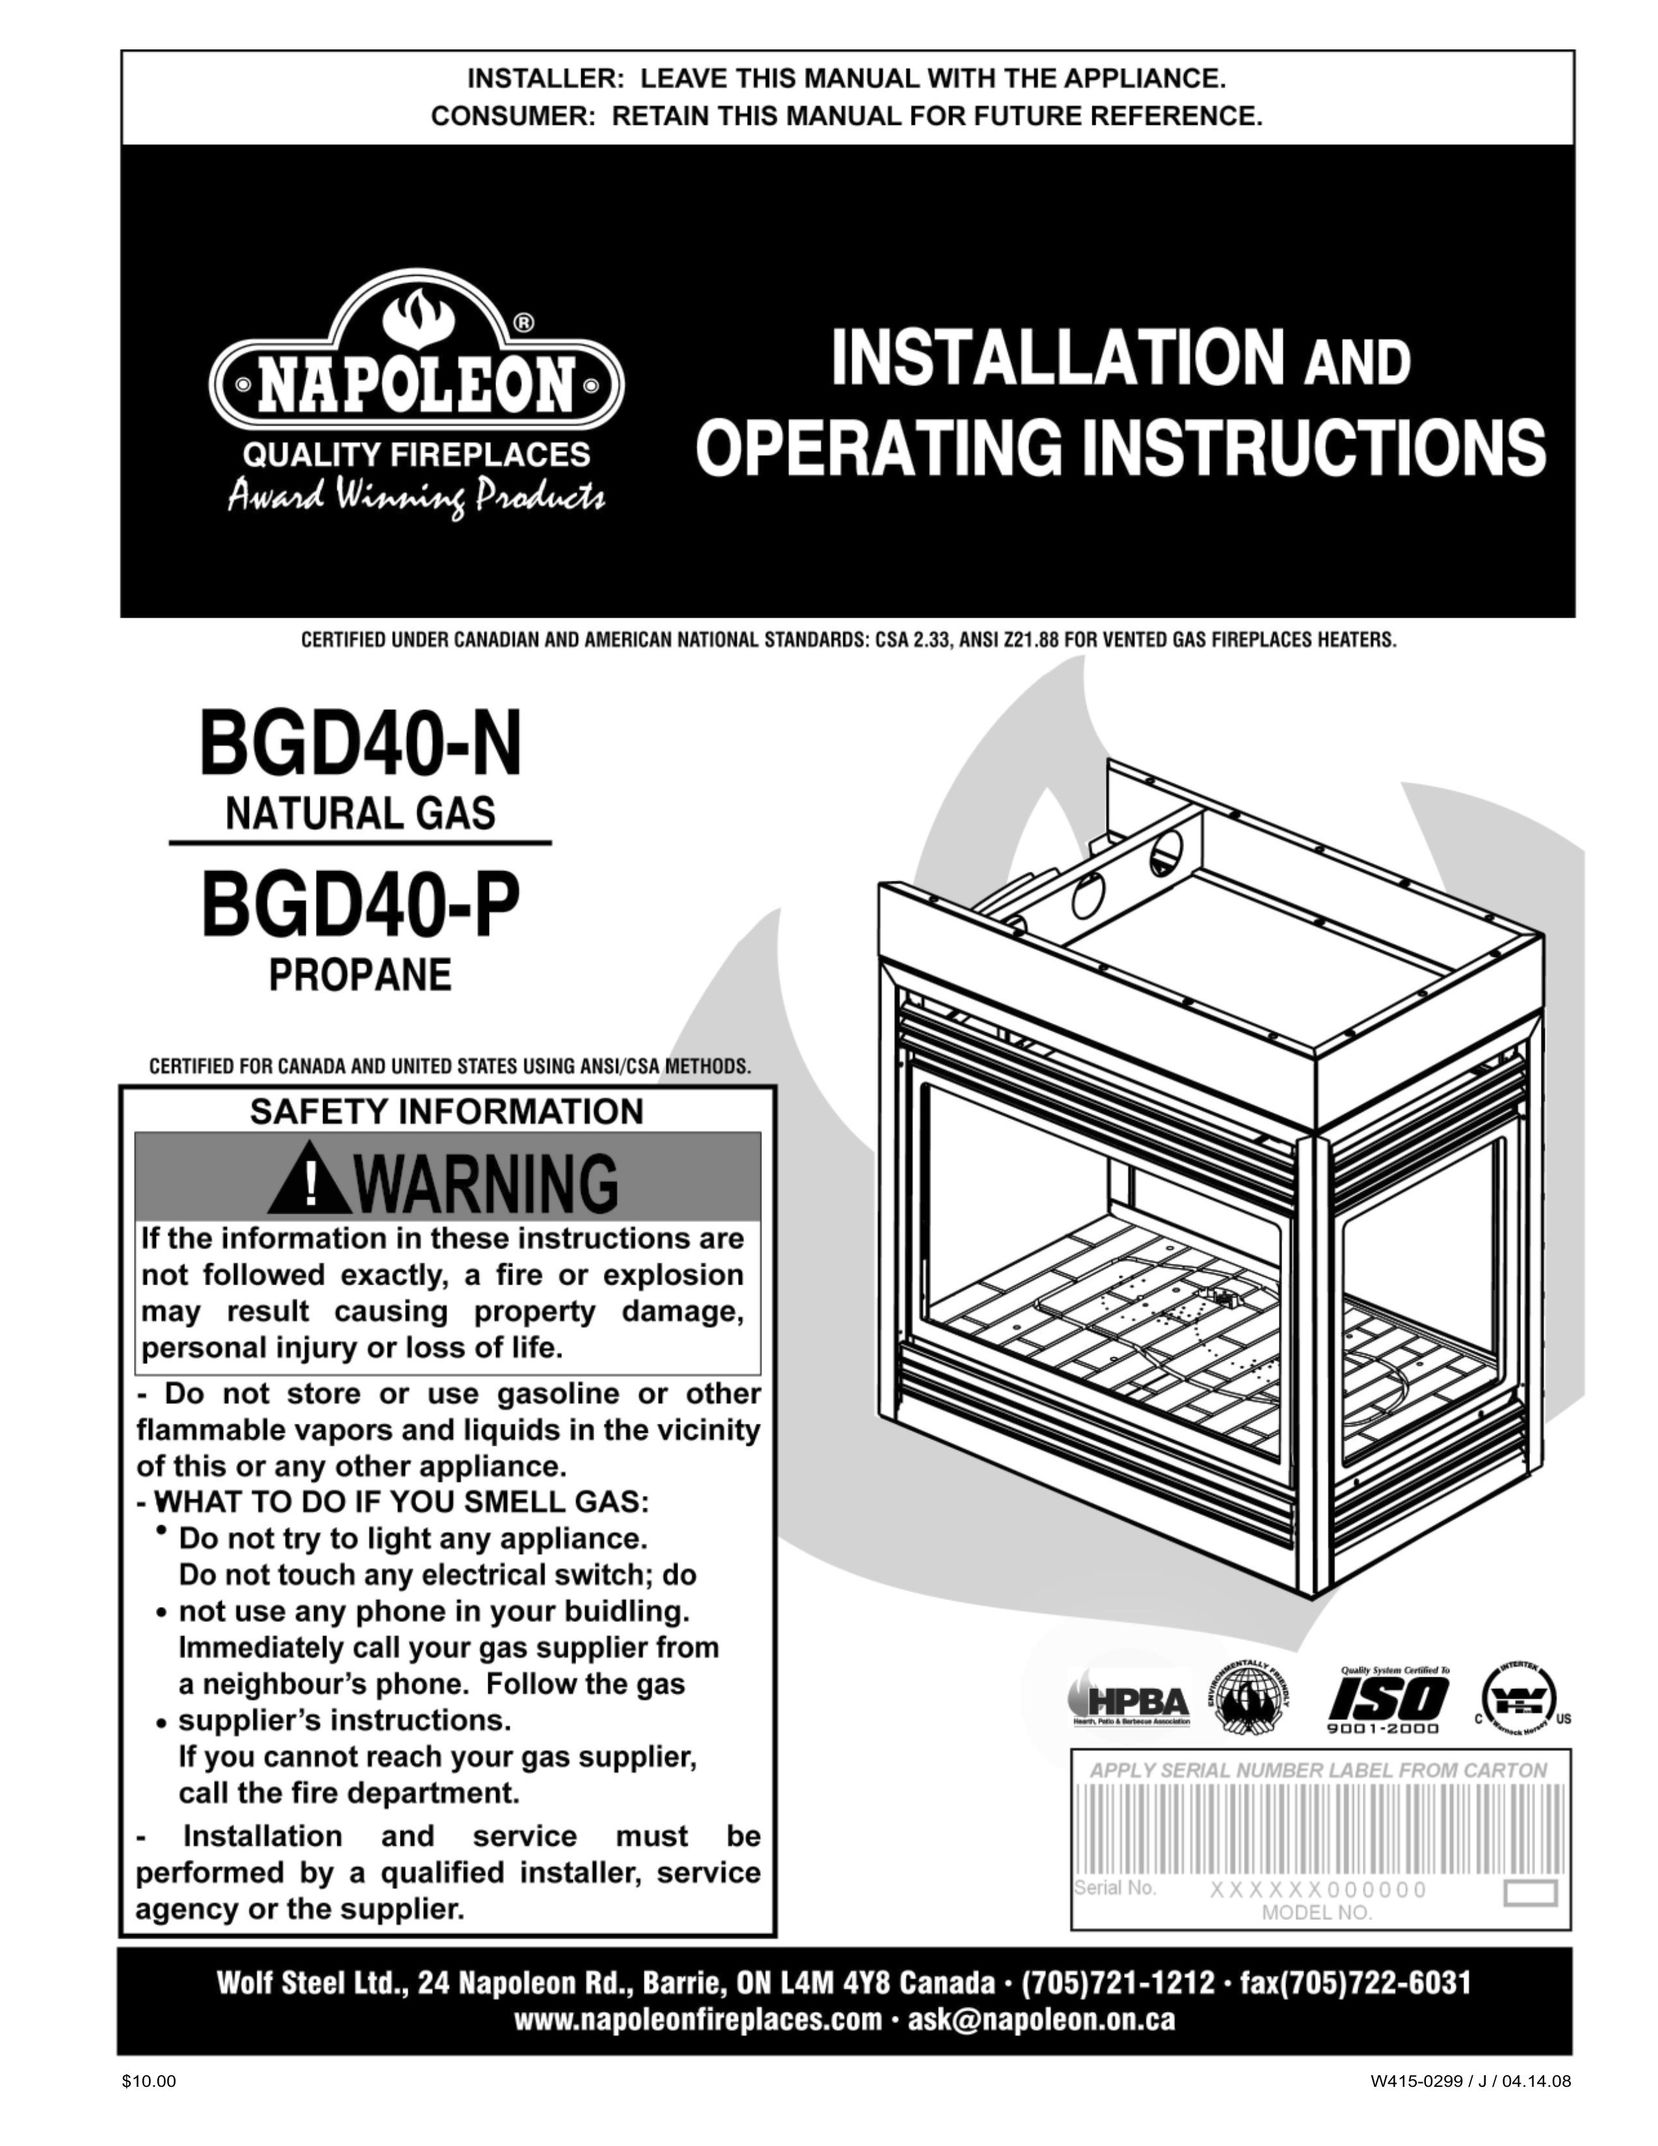 Napoleon Fireplaces BGD40-N Indoor Fireplace User Manual